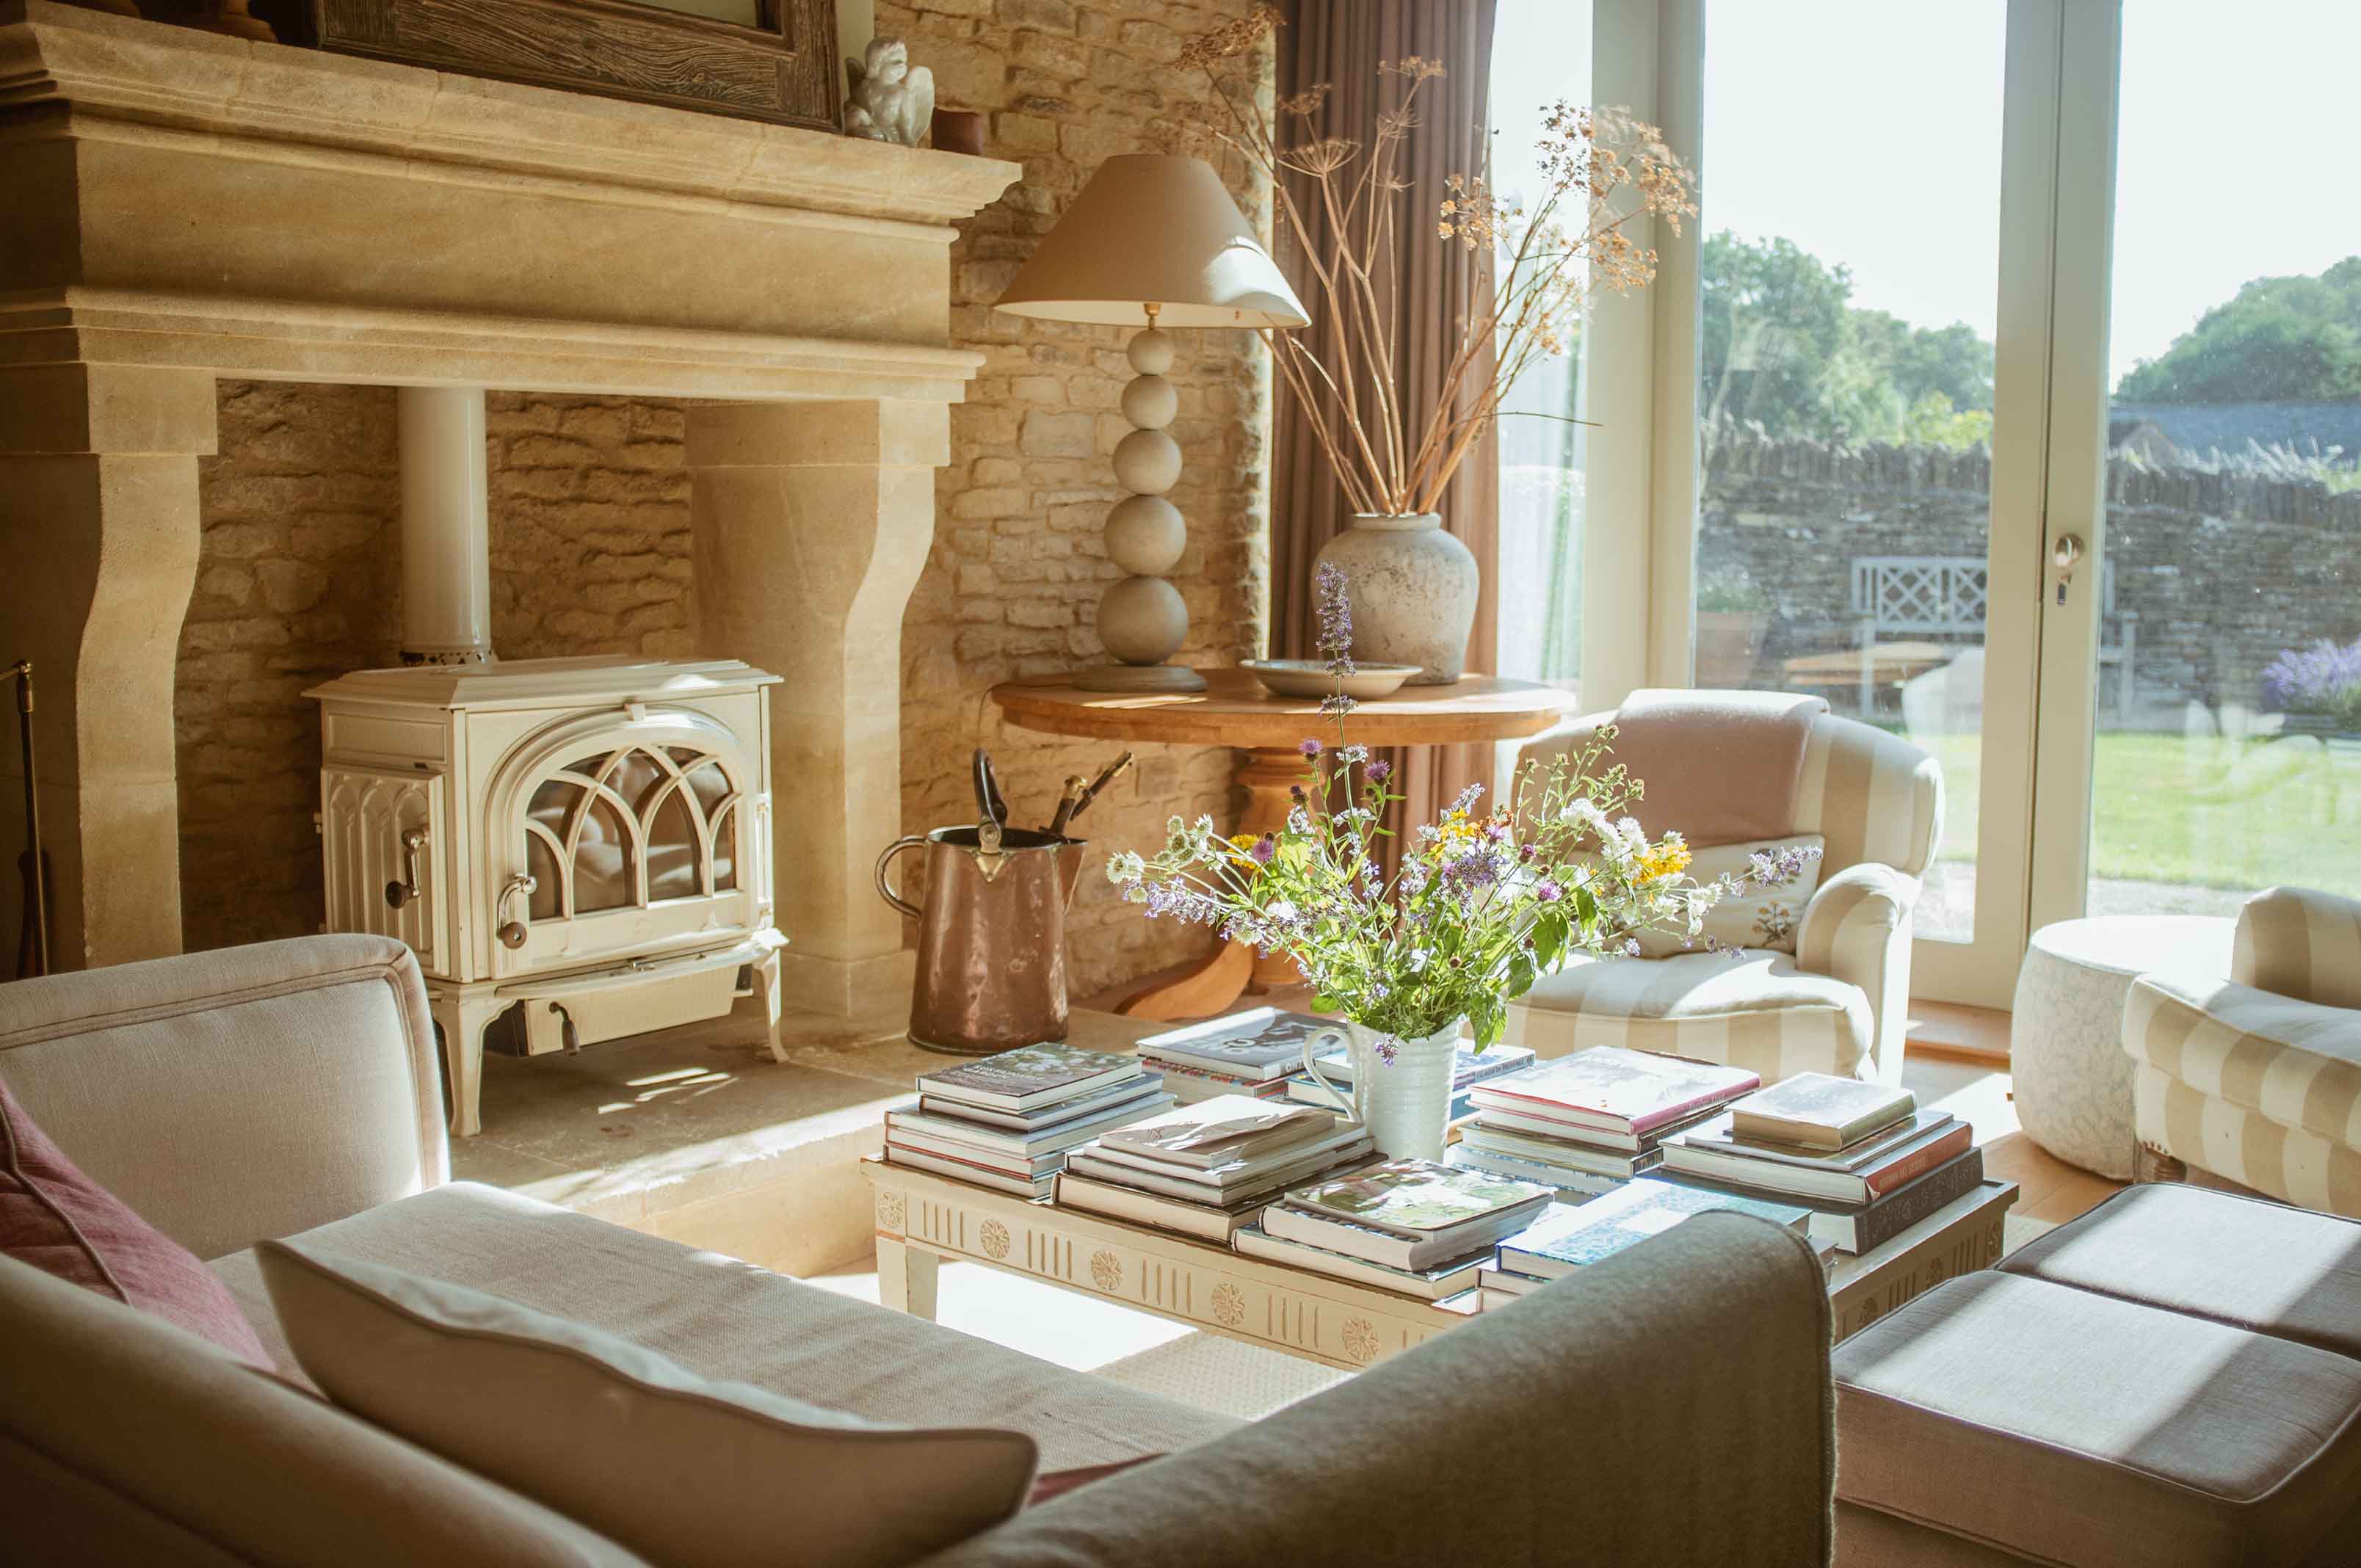 The picturesque reading room of Lavender bathed in natural light 